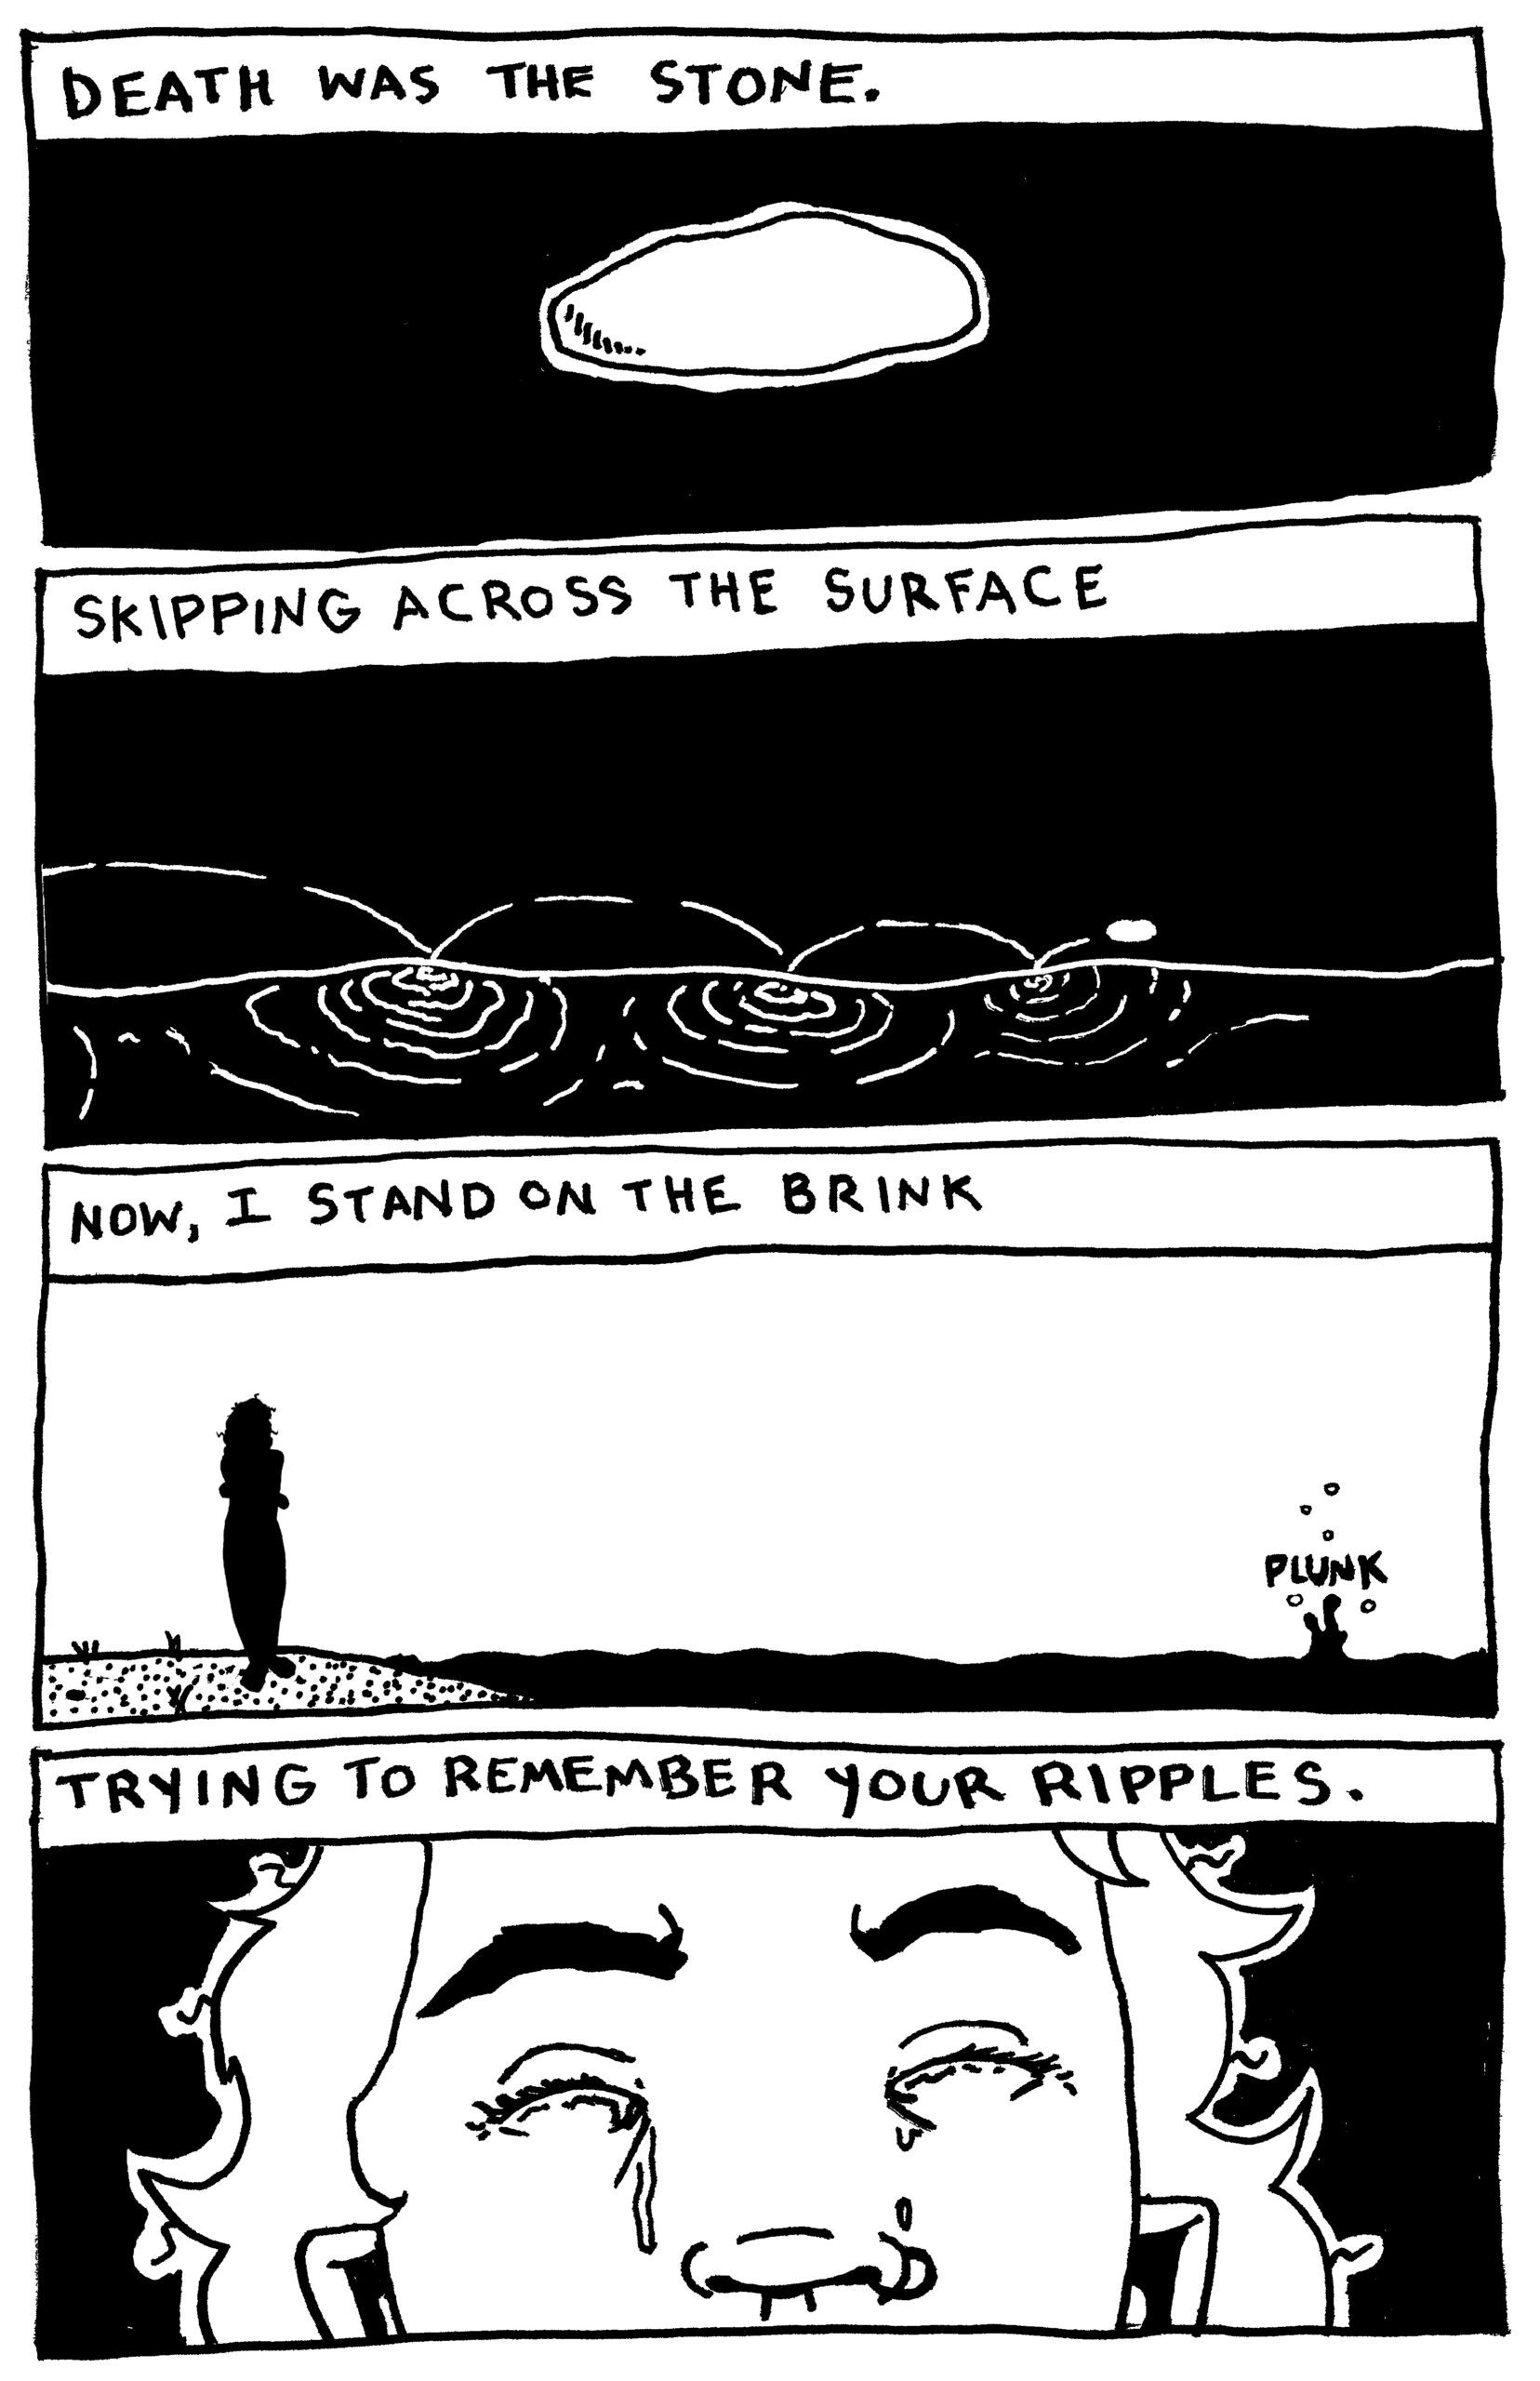 
Note: all images in black and white

Panel 1 text: Death was the stone.

Panel 1 image: a white stone in the center of the frame

Panel 2 text: Skipping across the surface

Panel 2 image: a stone skipping across water

Panel 3 text: Now, I stand on the brink.

Panel 3 image: the silhouette of a person standing on a beach. the stone sinks with a "plunk"

Panel 4 text: Trying to remember your ripples.

Panel 4: A person with closed eyes cries.